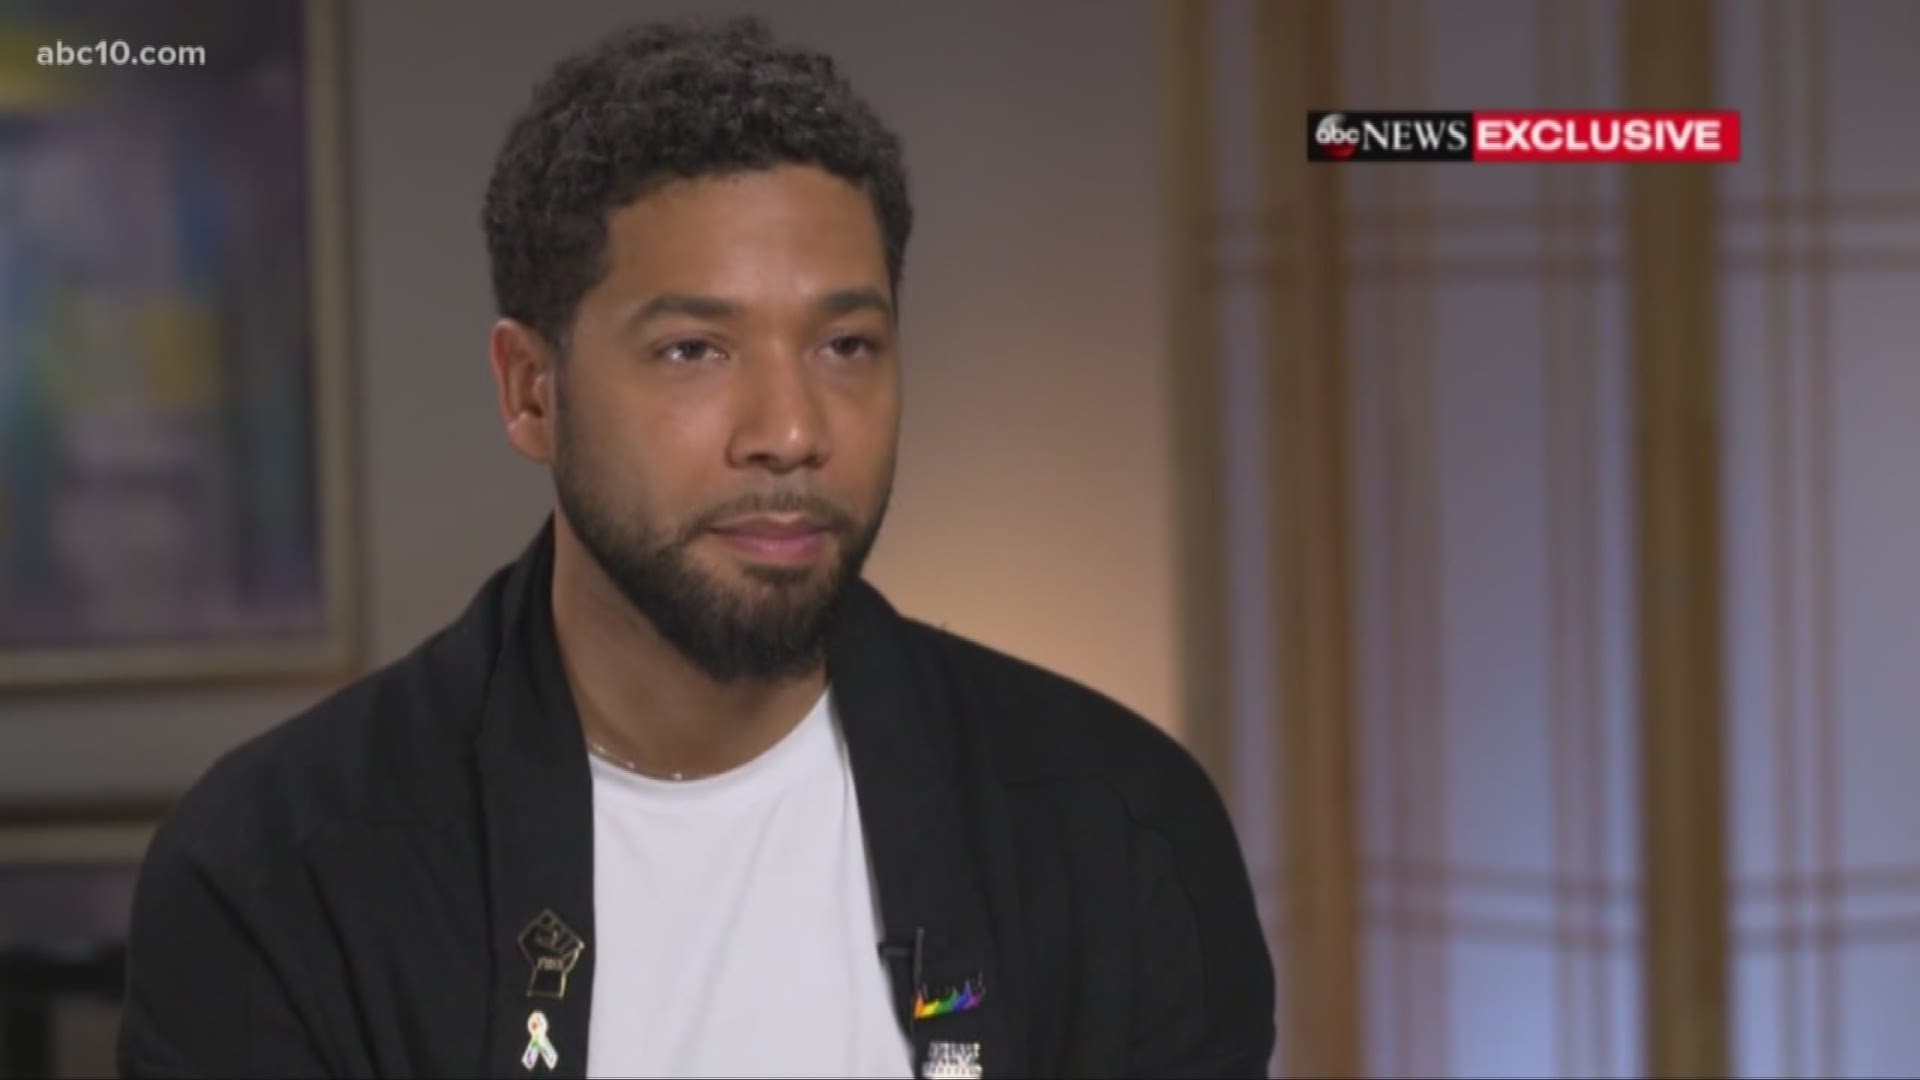 The Jussie Smollett case has been a convoluted one to say the least. Ariane Datil breaks down what we know so far in today's trending news.